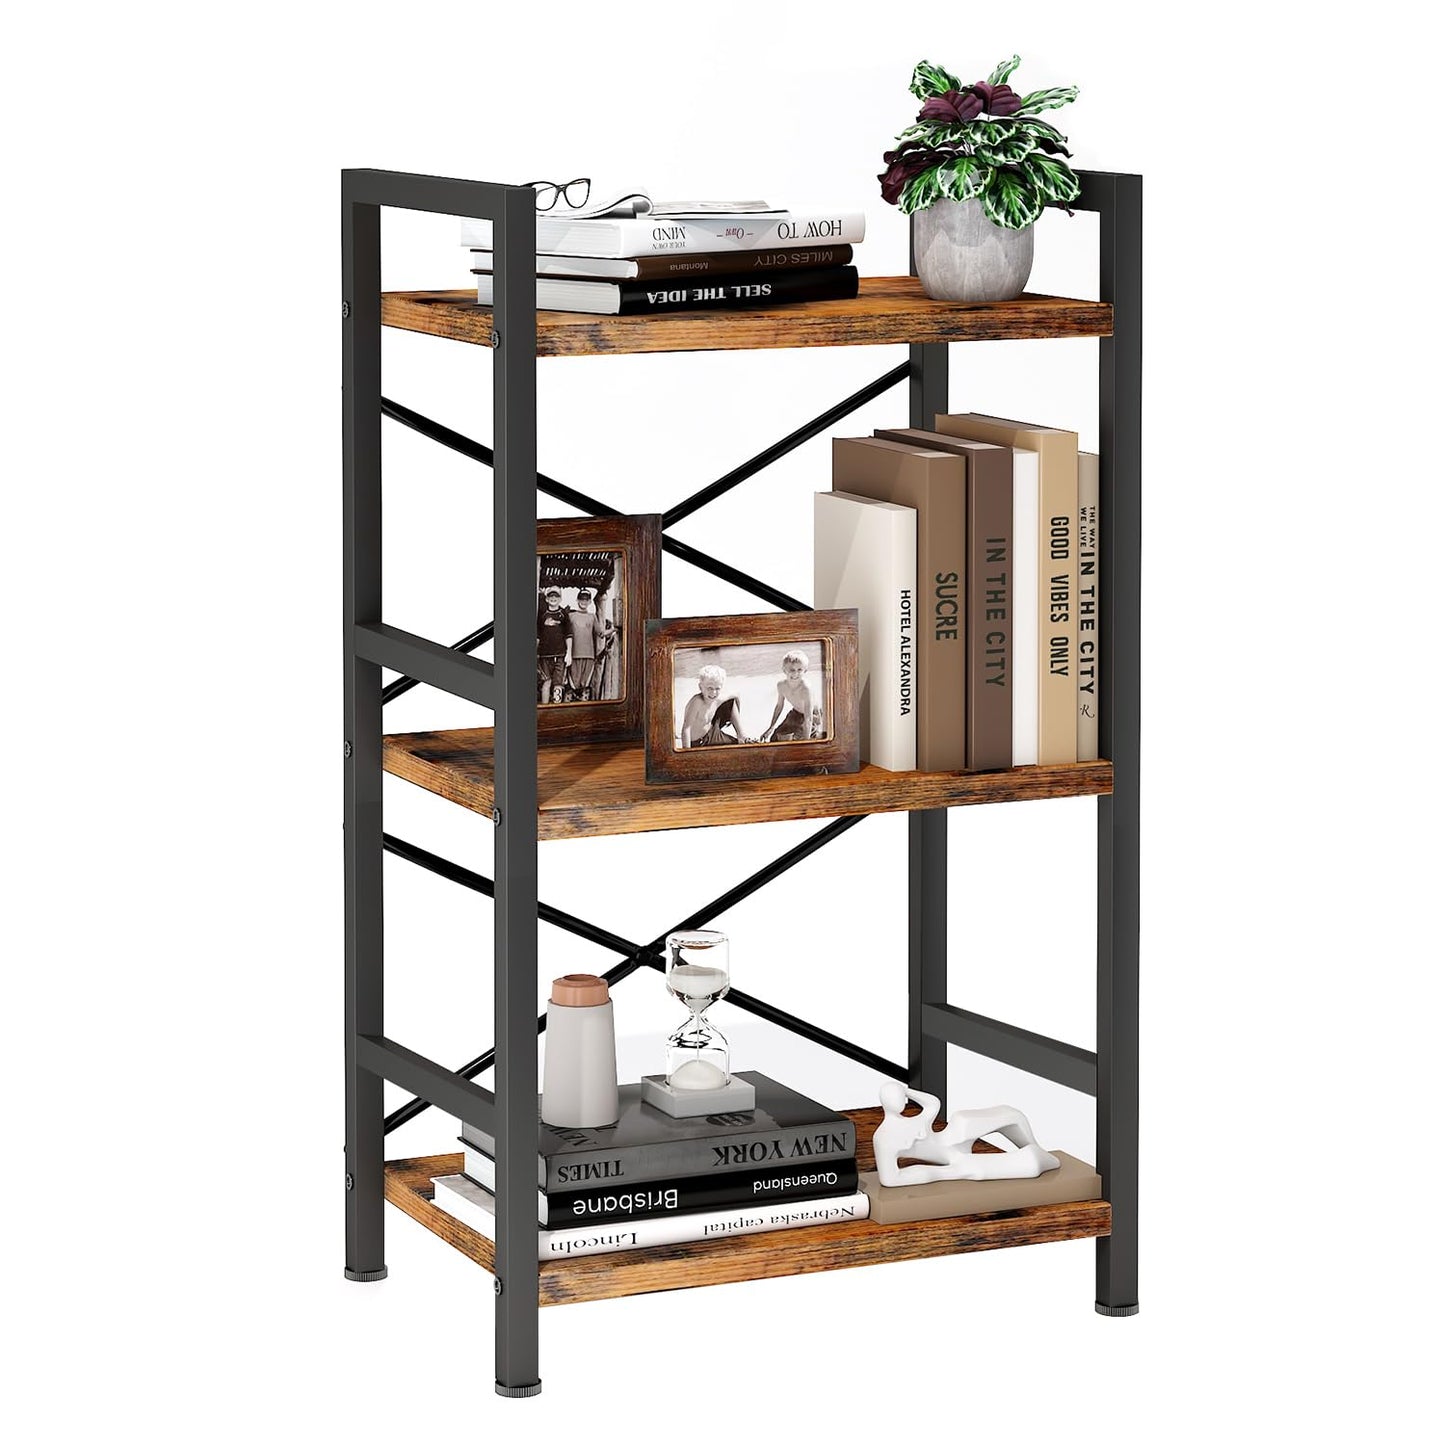 Homeiju Bookshelf, 3 Tier Industrial Bookcase, Metal Small Bookcase, Rustic Etagere Book Shelf Storage Organizer for Living Room, Bedroom, and Home Office(Rustic Brown) Patent Pending D29873033